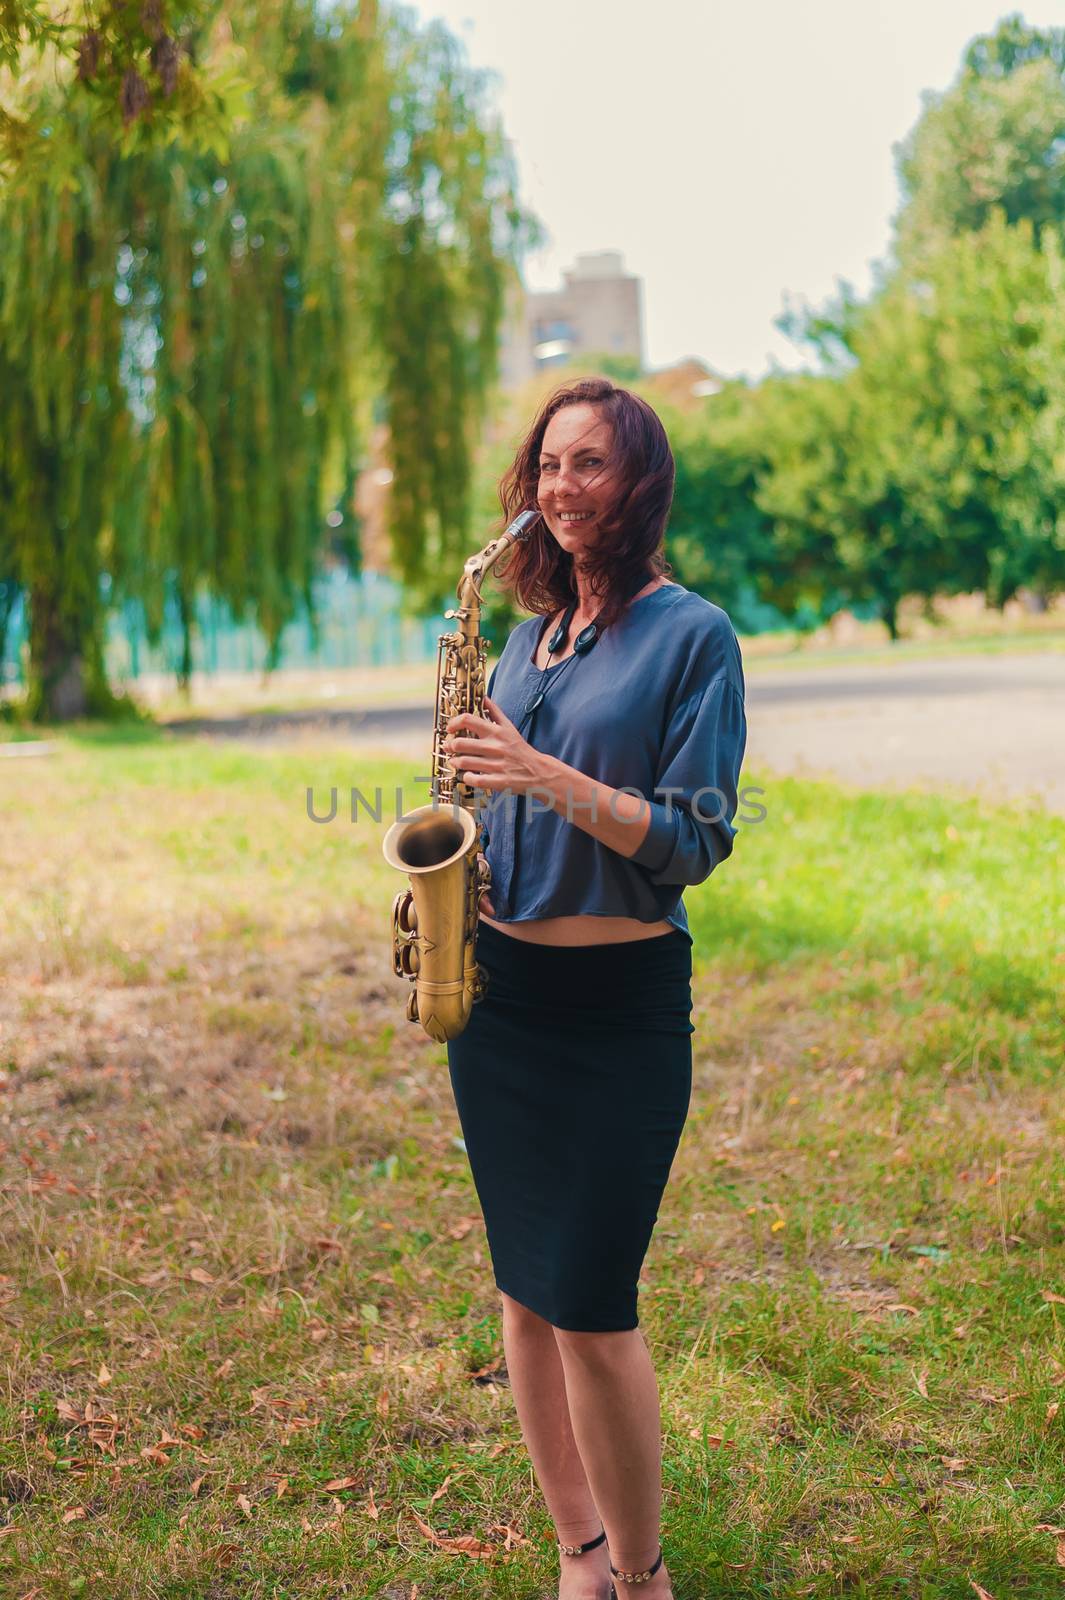 cute young redhead woman in blue blouse and black skirt posing with saxophone in the park by chernobrovin